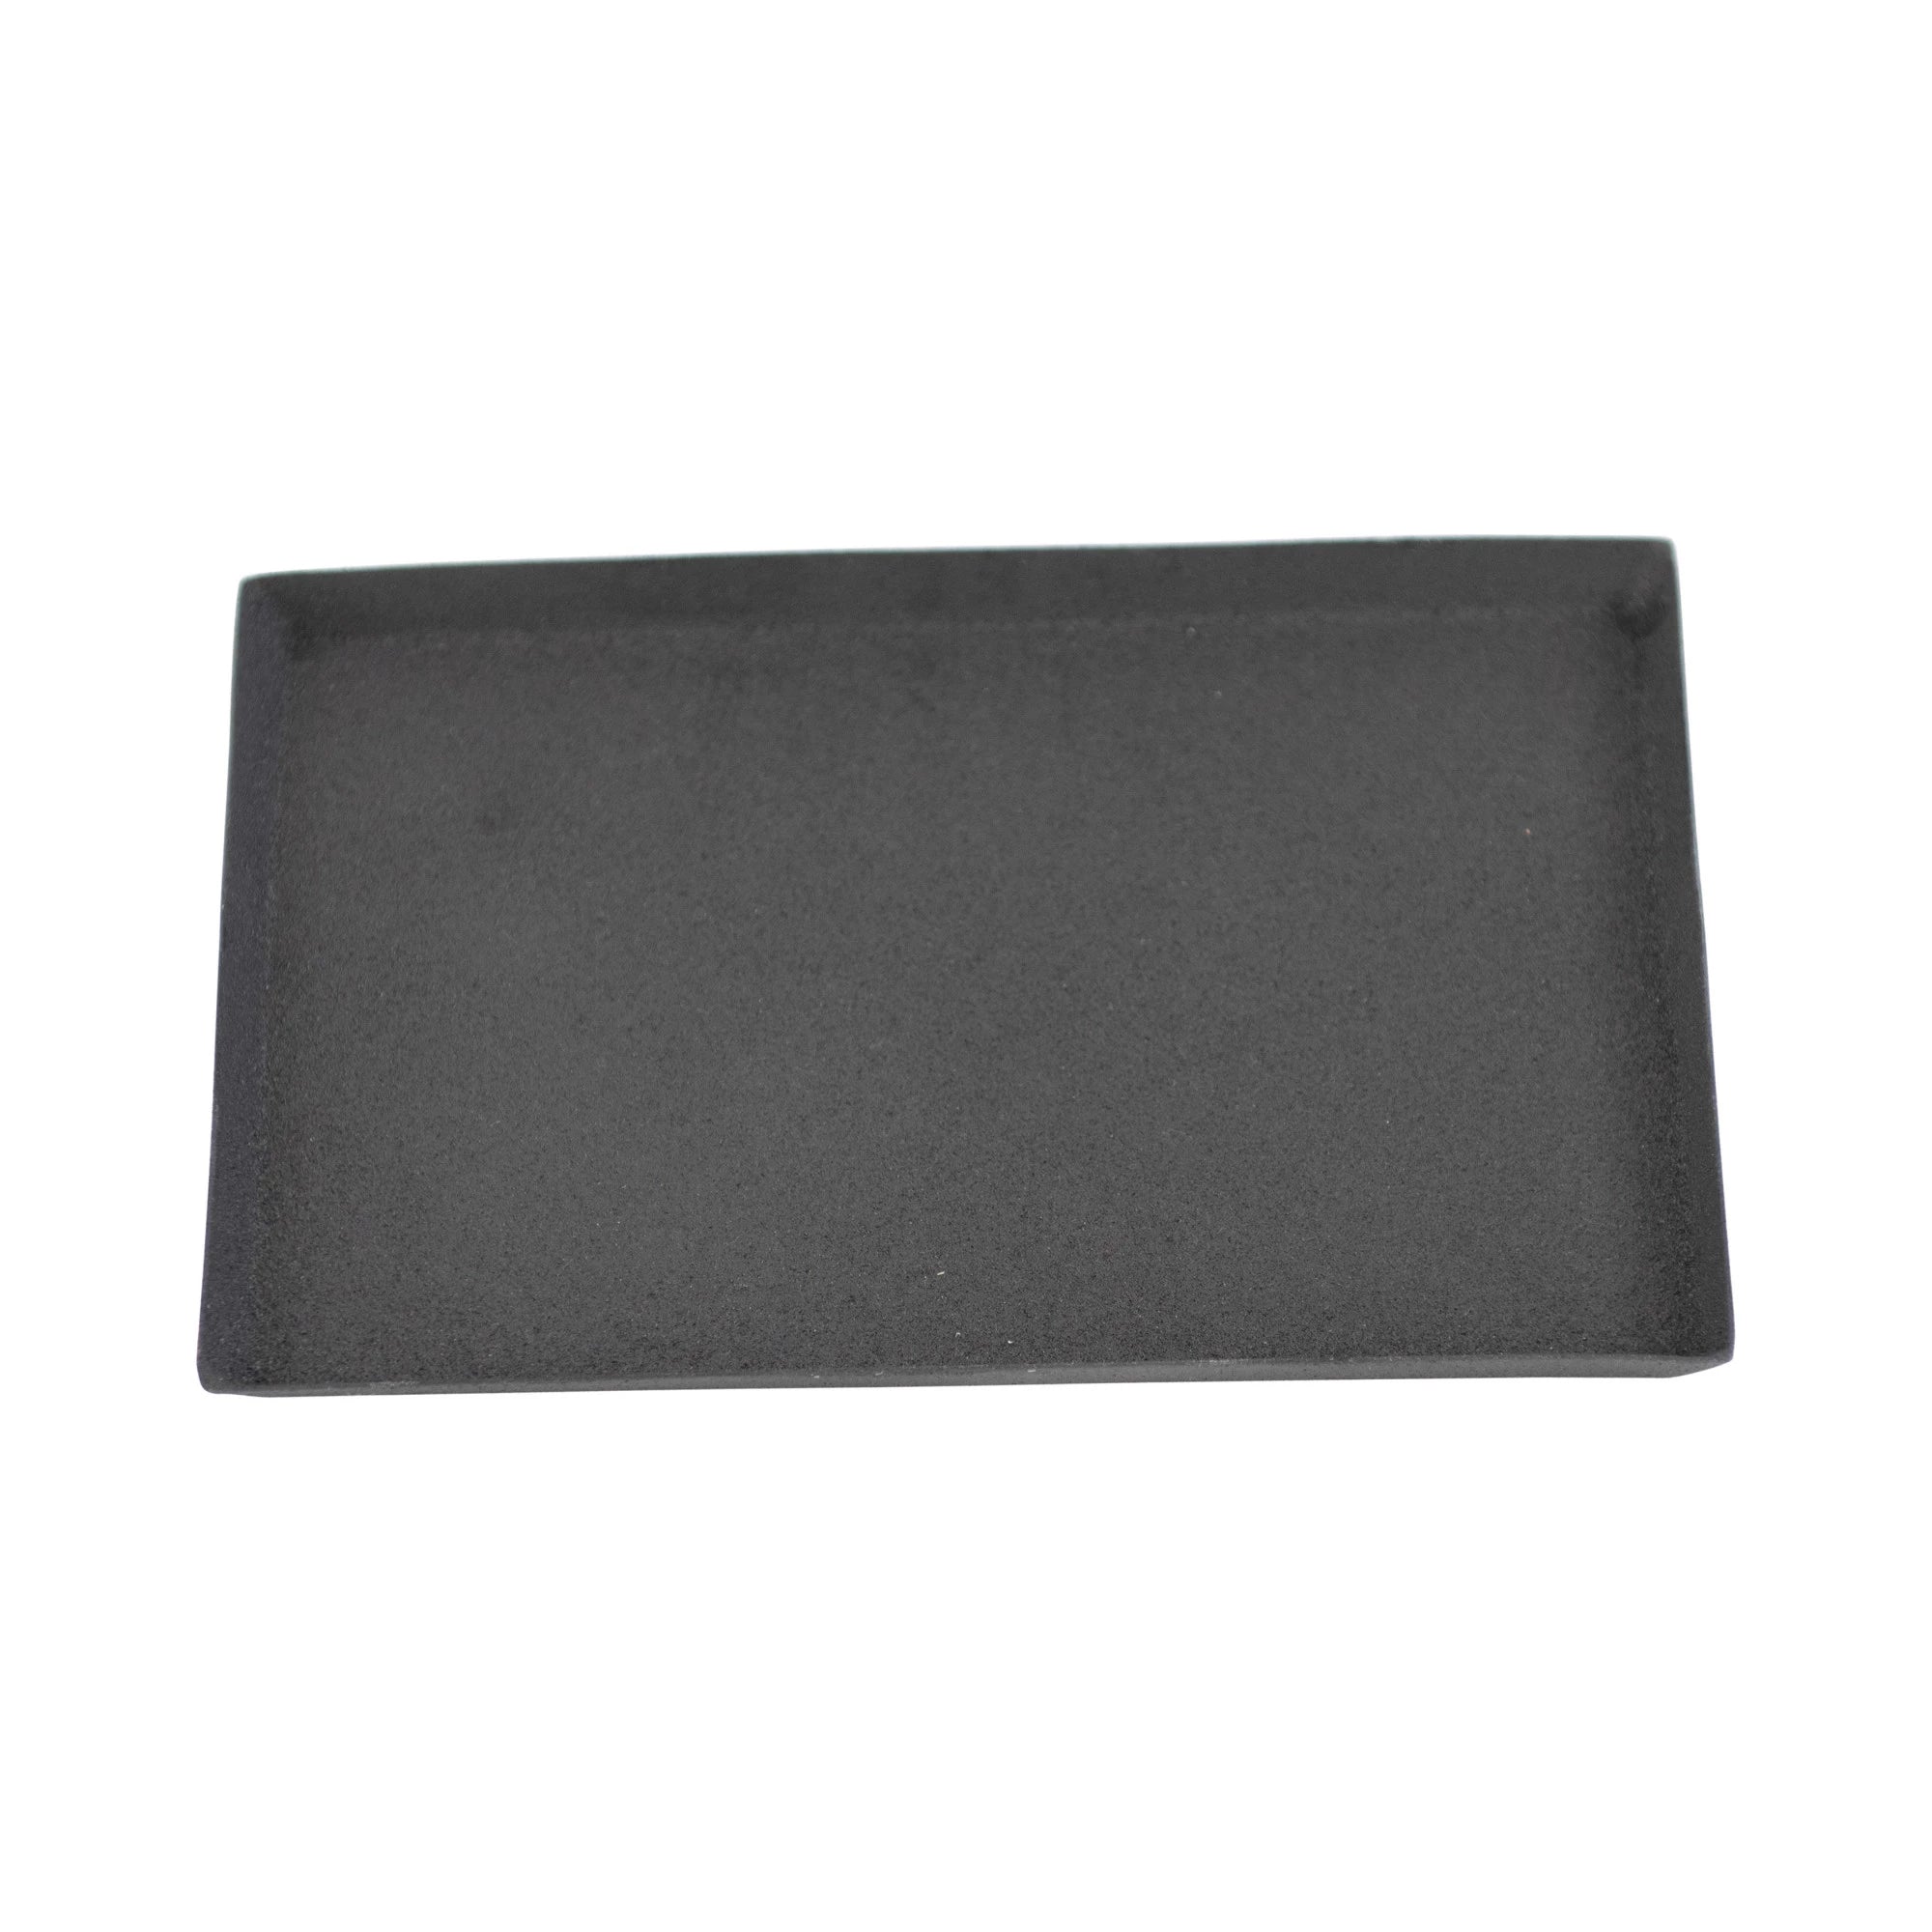 Black Textured Serving Tray